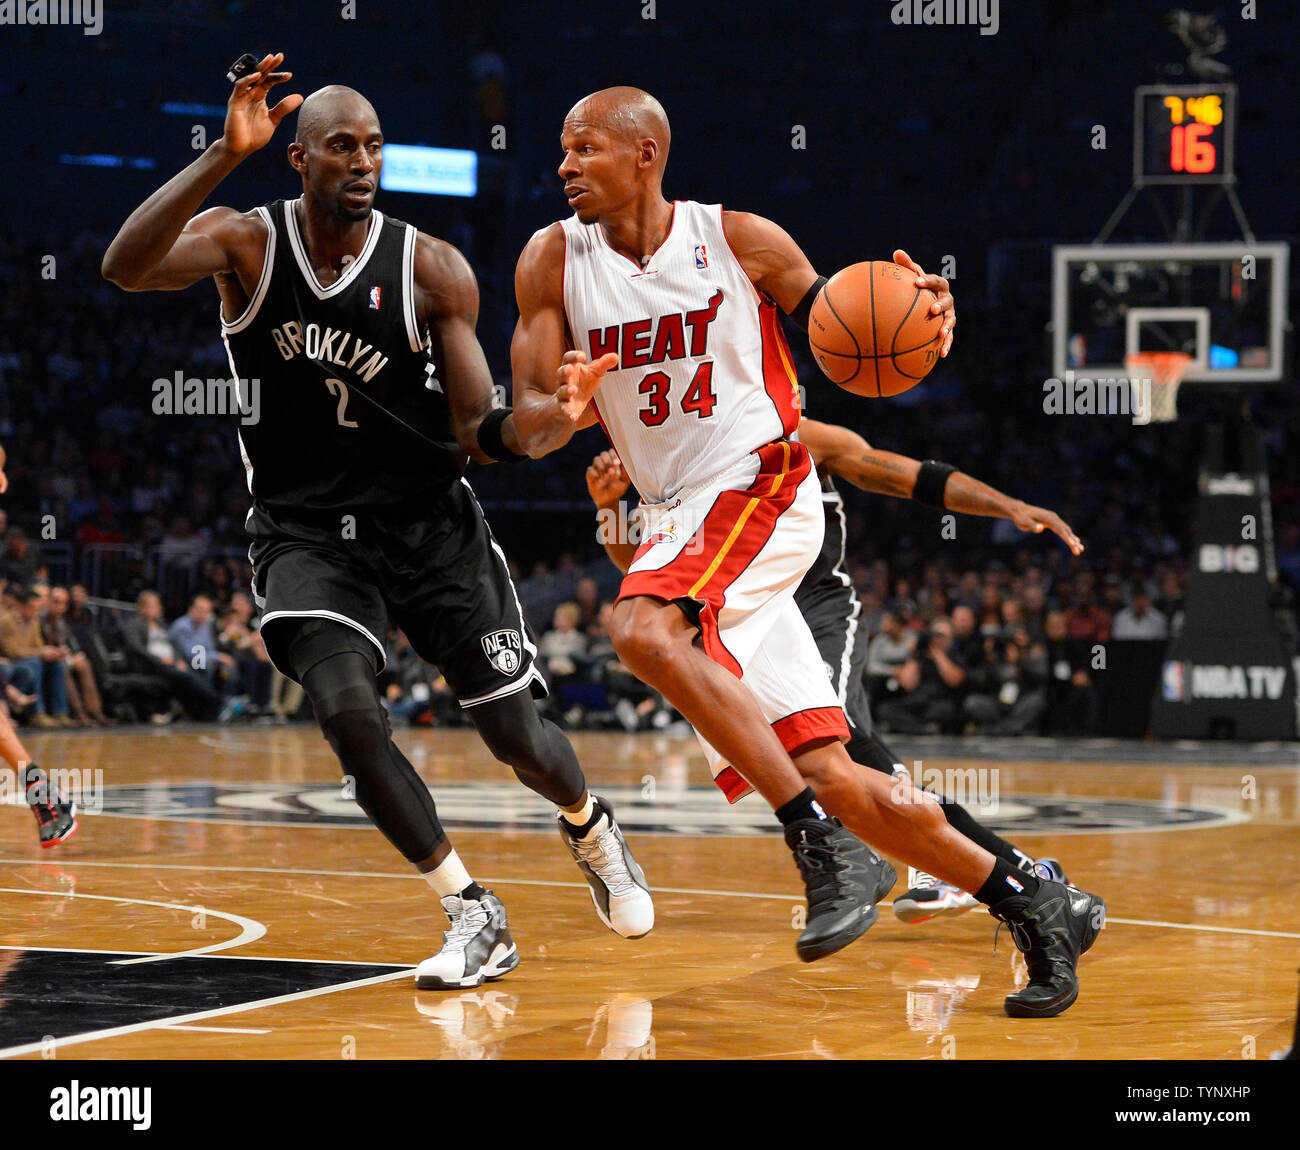 Miami Heat shooting guard Ray Allen (34) drives in against Brooklyn Nets power forward Kevin Garnett (2) during the second quarter at Barclays Center in New York City on November 1, 2013.   UPI/Rich Kane Stock Photo